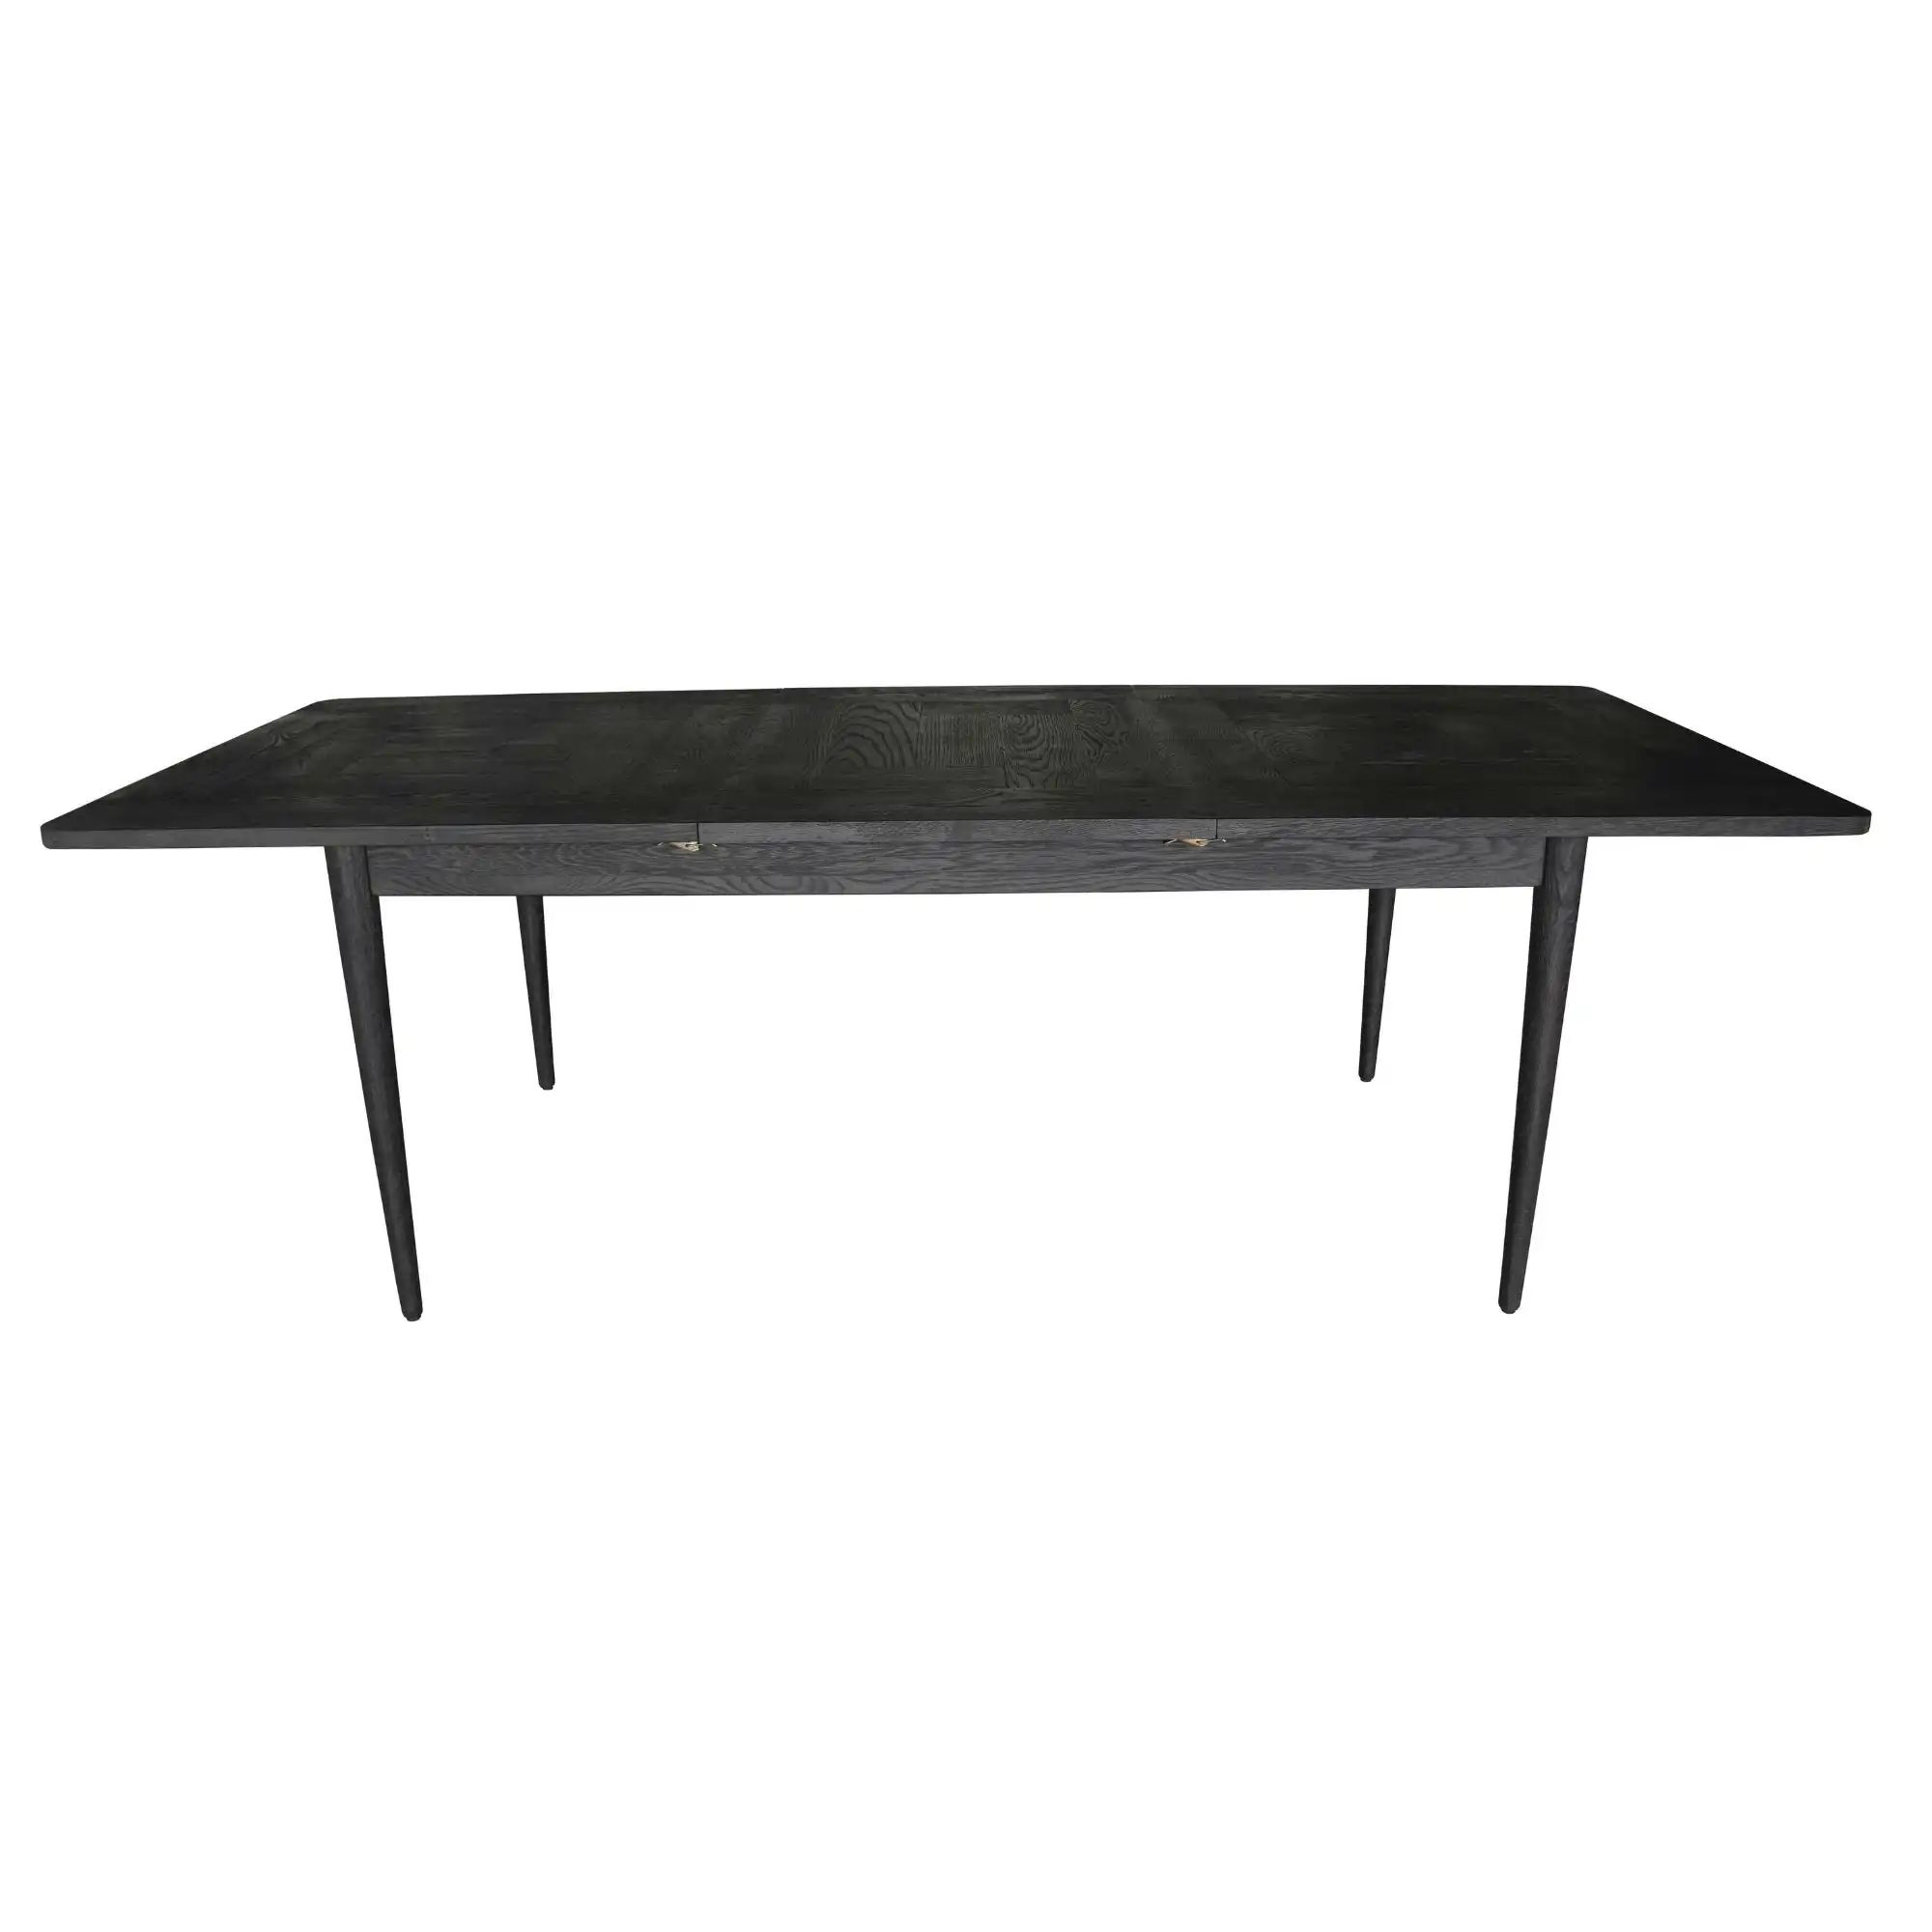 Claire 170-230cm Extendable Dining Table